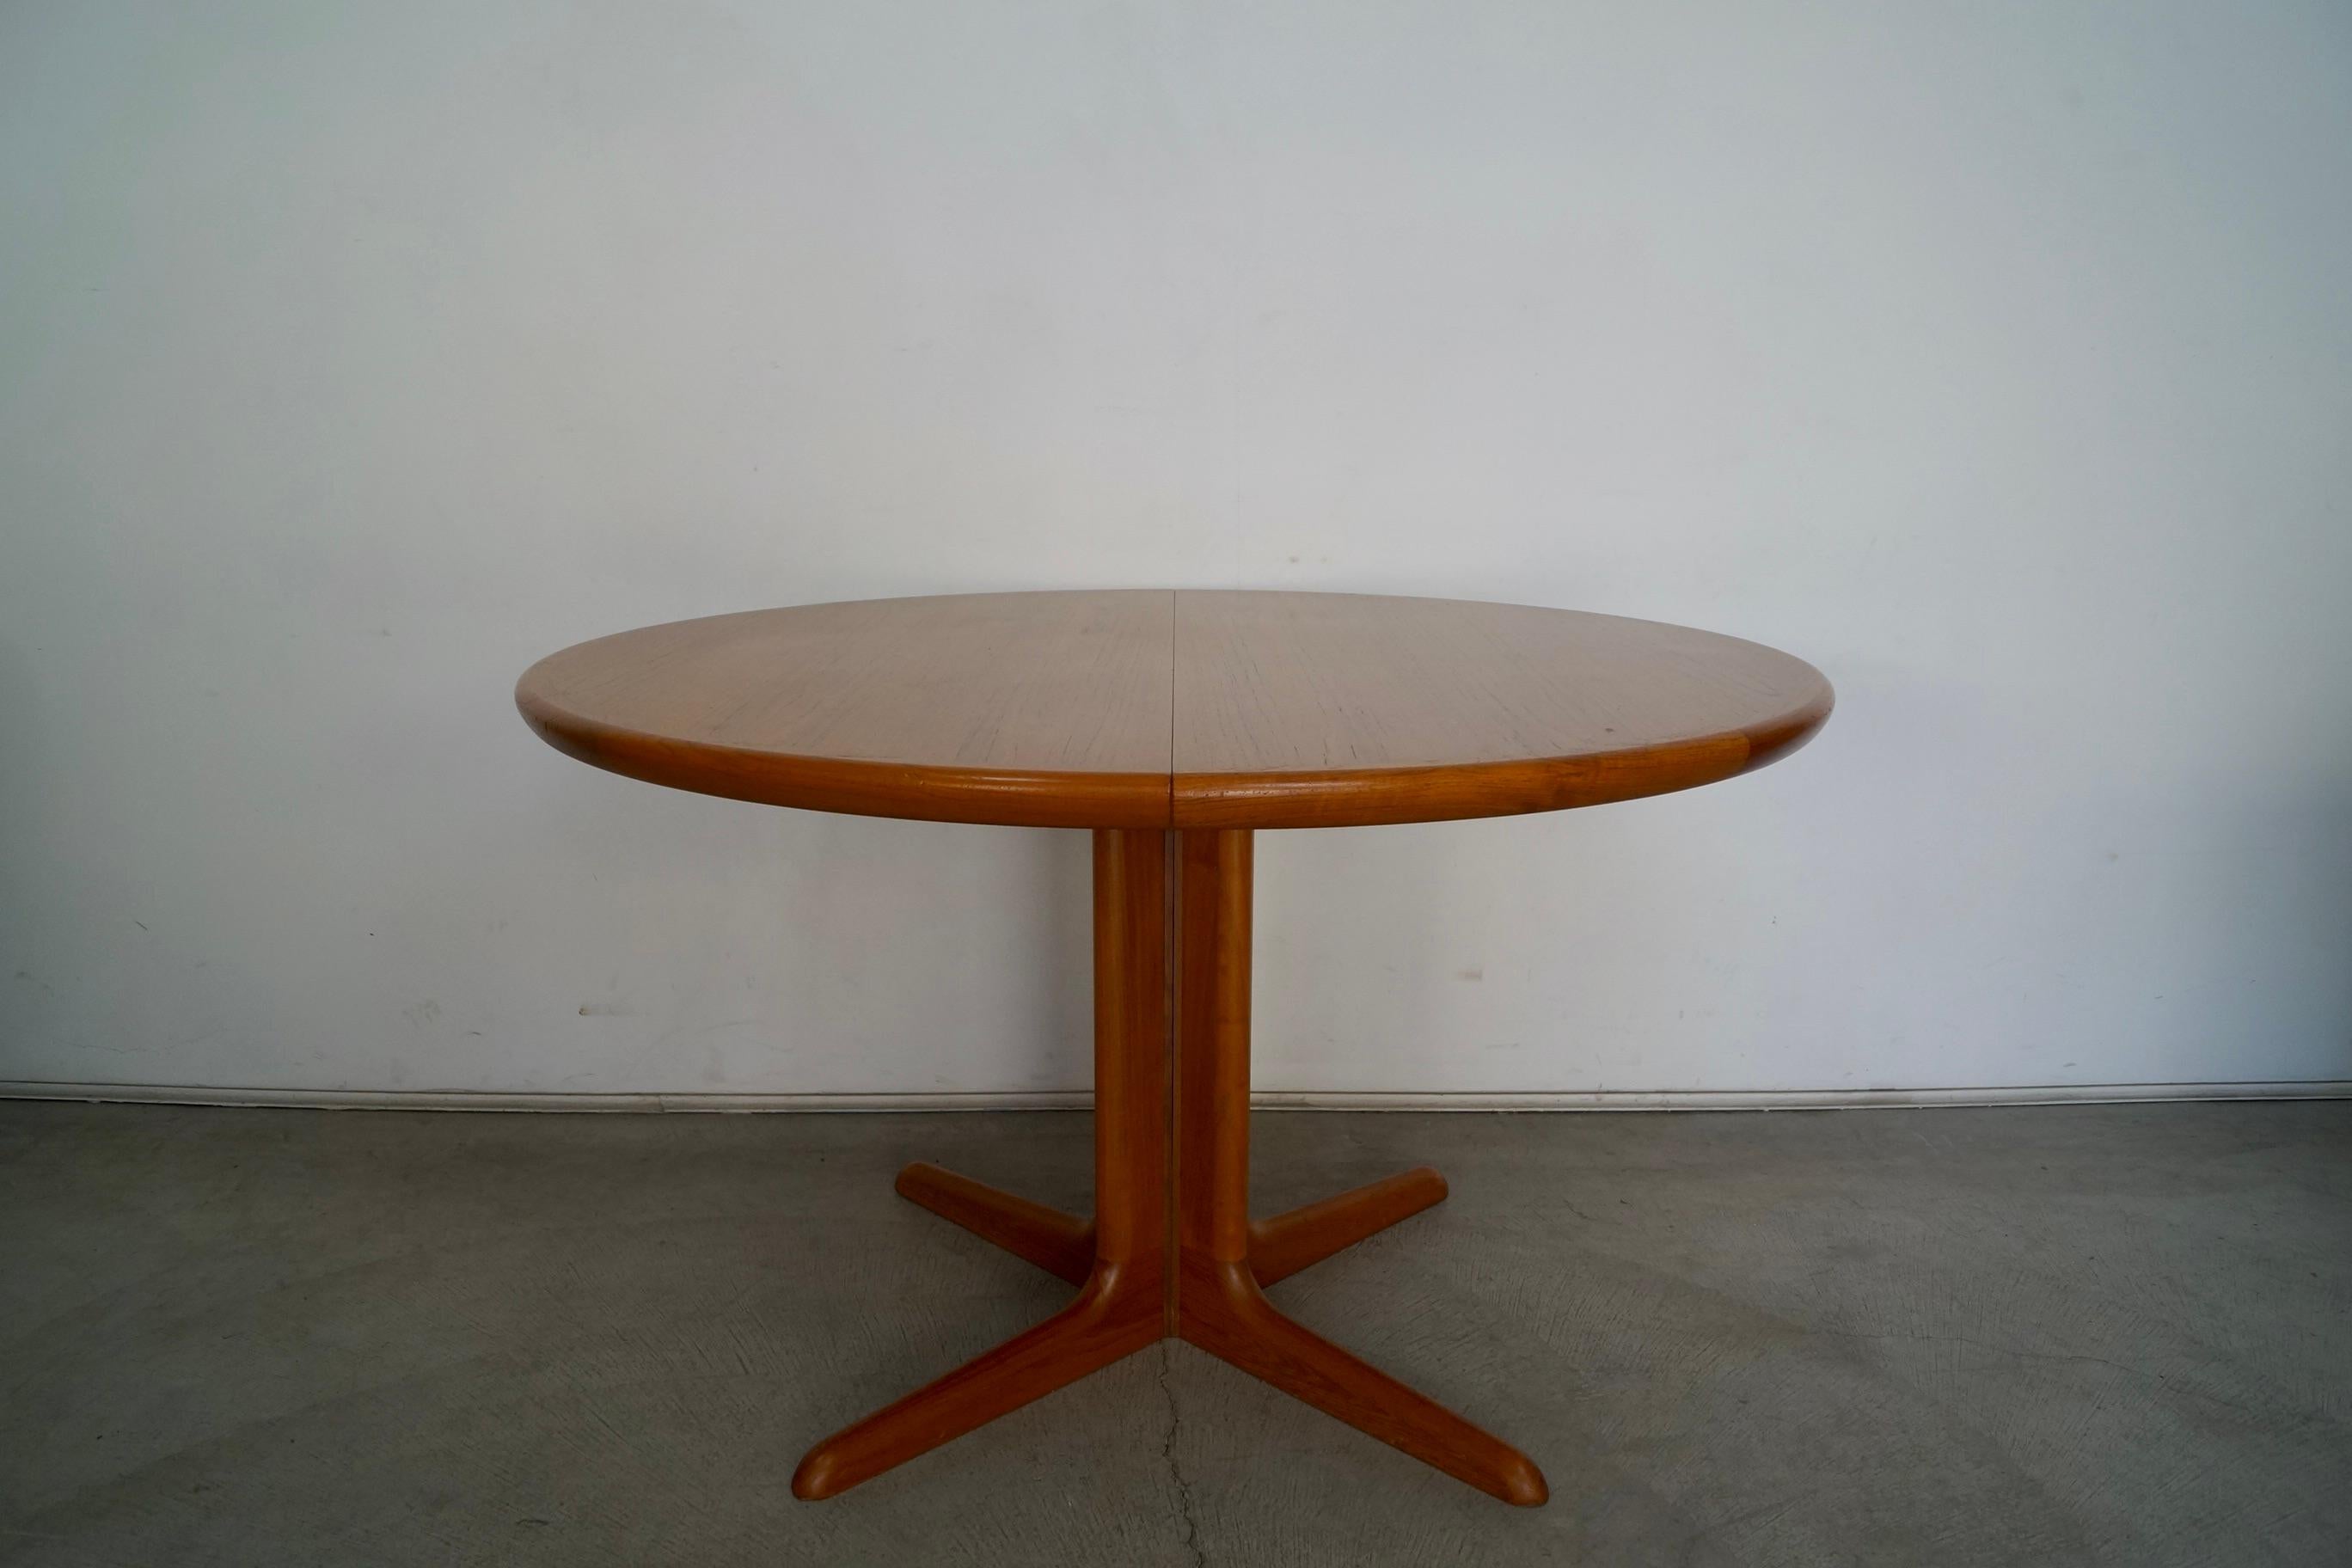 Original Mid-Century Modern dining table for sale. Manufactured in the 1970's by Skovby, and made in Denmark. Beautiful Scandinavian design in teak with solid teak legs. It's in great original condition with some soft wear to the top as shown. The